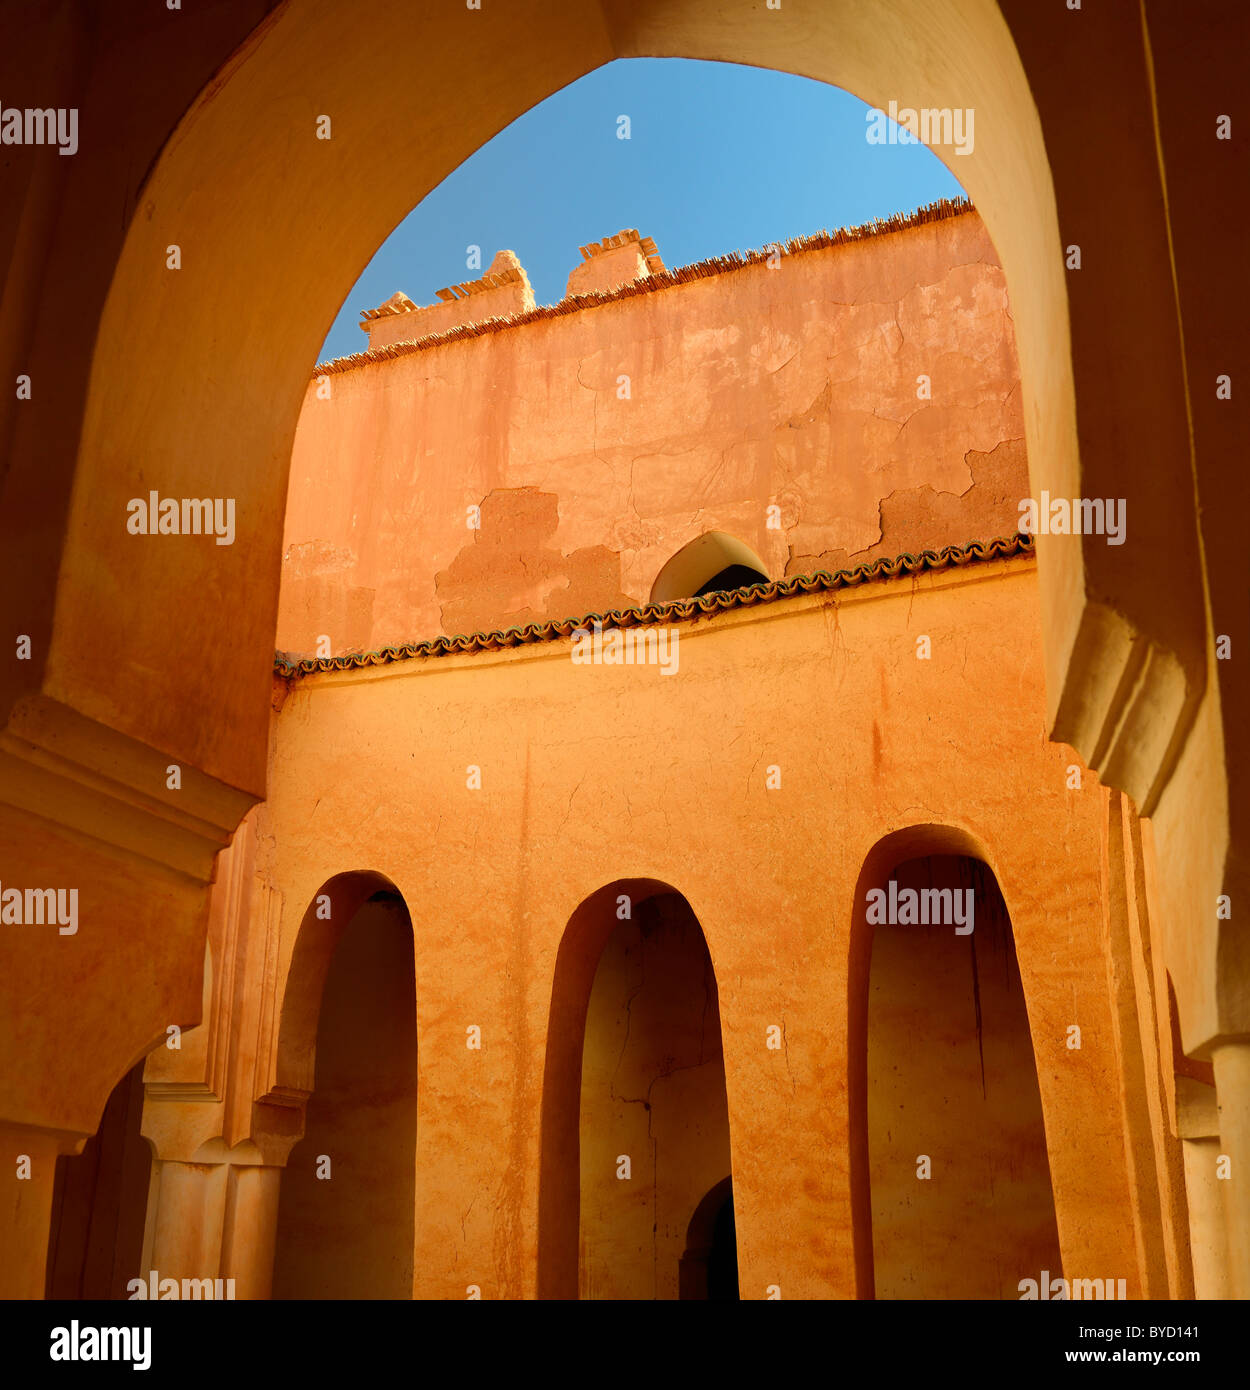 Arches in the inner courtyard of the crumbling Kasbah Ait Youl Dades Gorge Morocco Stock Photo